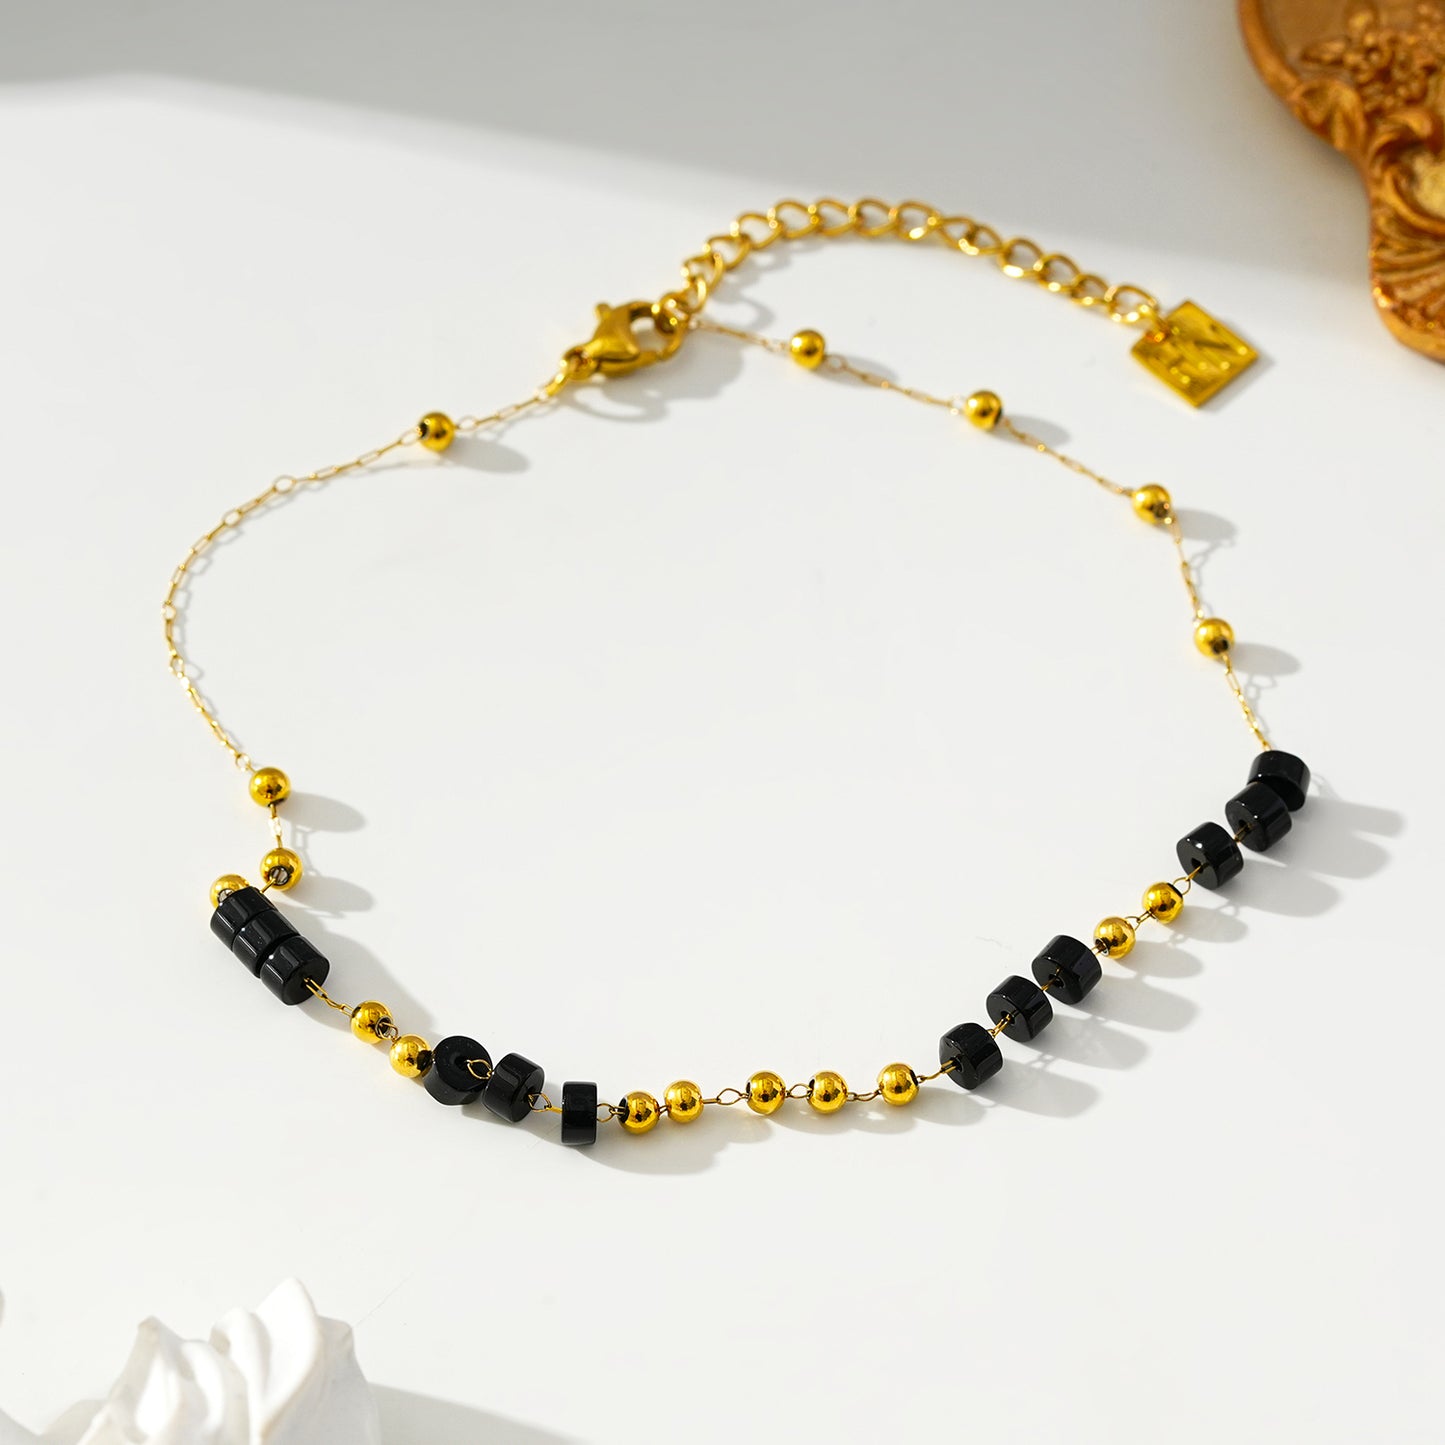 Style ROSARIO LG 1222: Black Onyx and Gold Beaded Chain Bracelet.